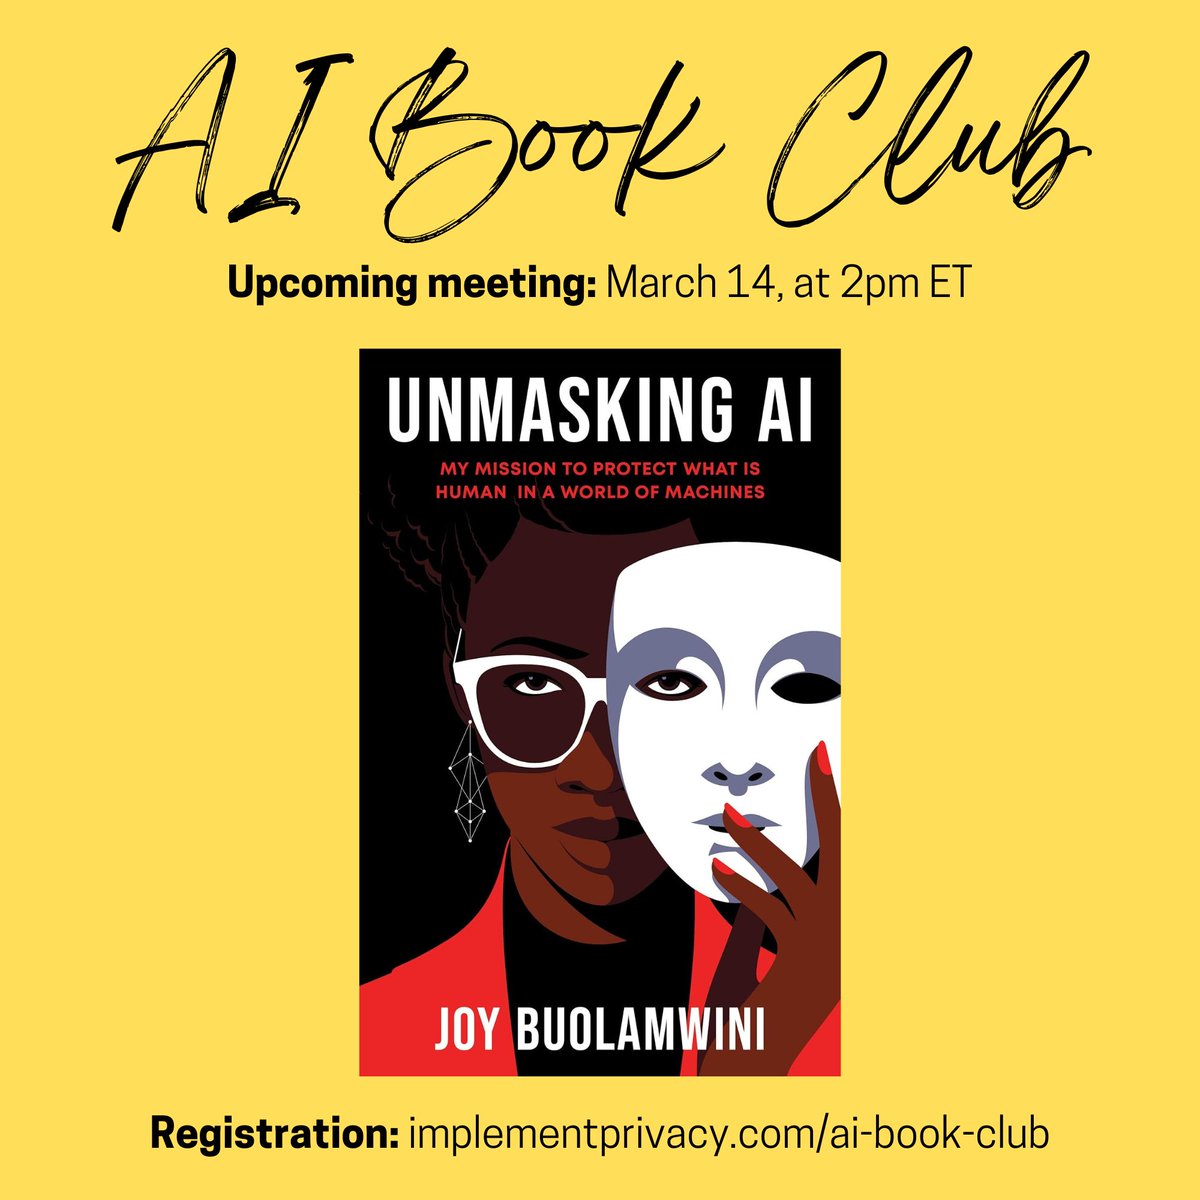 📚 600+ people have joined our AI Book Club, and we are now reading 'Unmasking AI' by @jovialjoy. We are looking for book commentators! Volunteers?